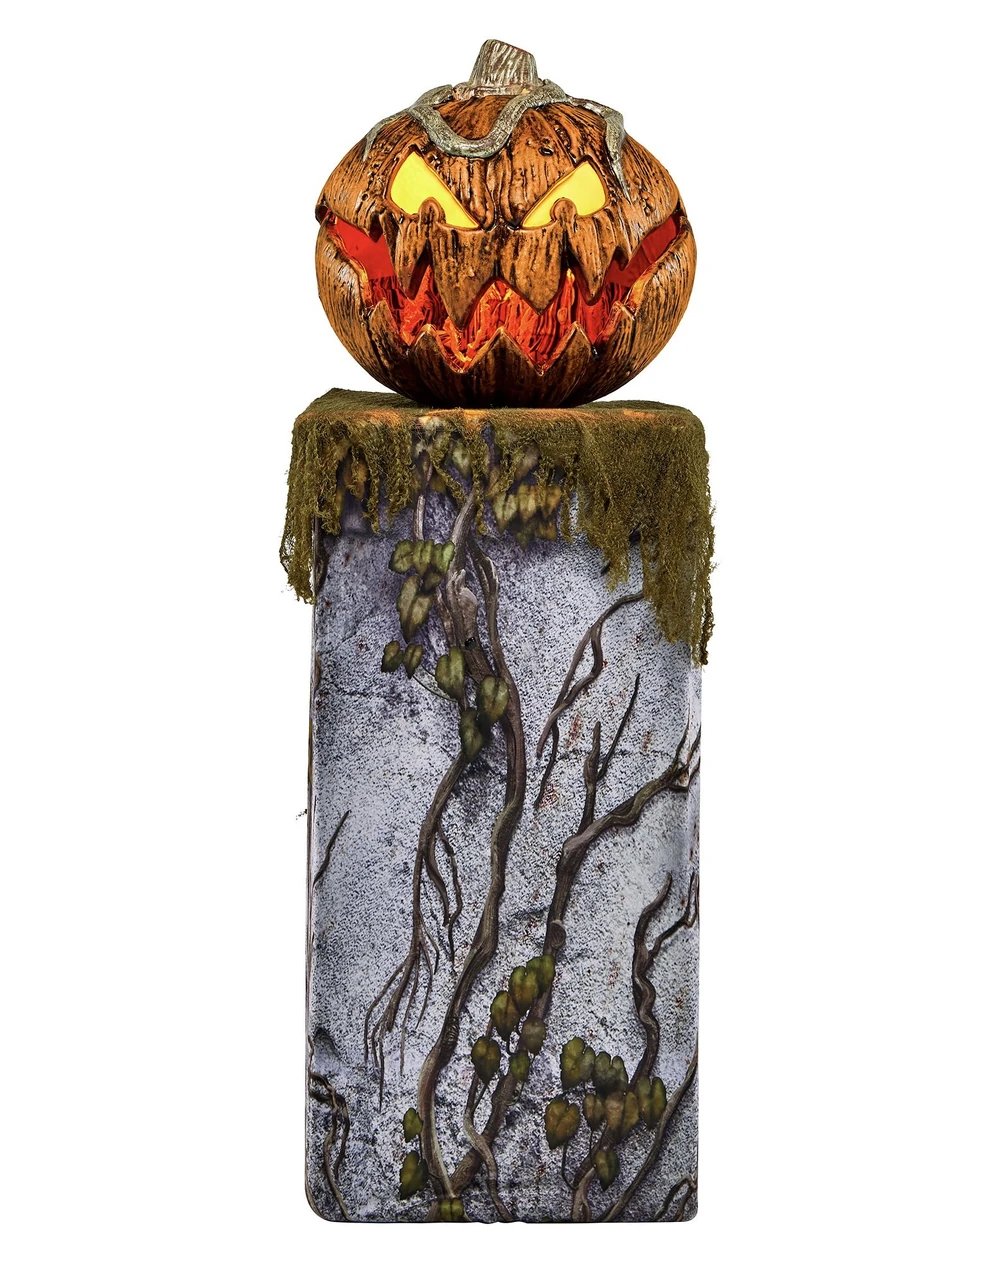 🎃🔥Spooky Deal: 49% OFF! Get Creepy with our Halloween Evil Pumpkin!👻🔥